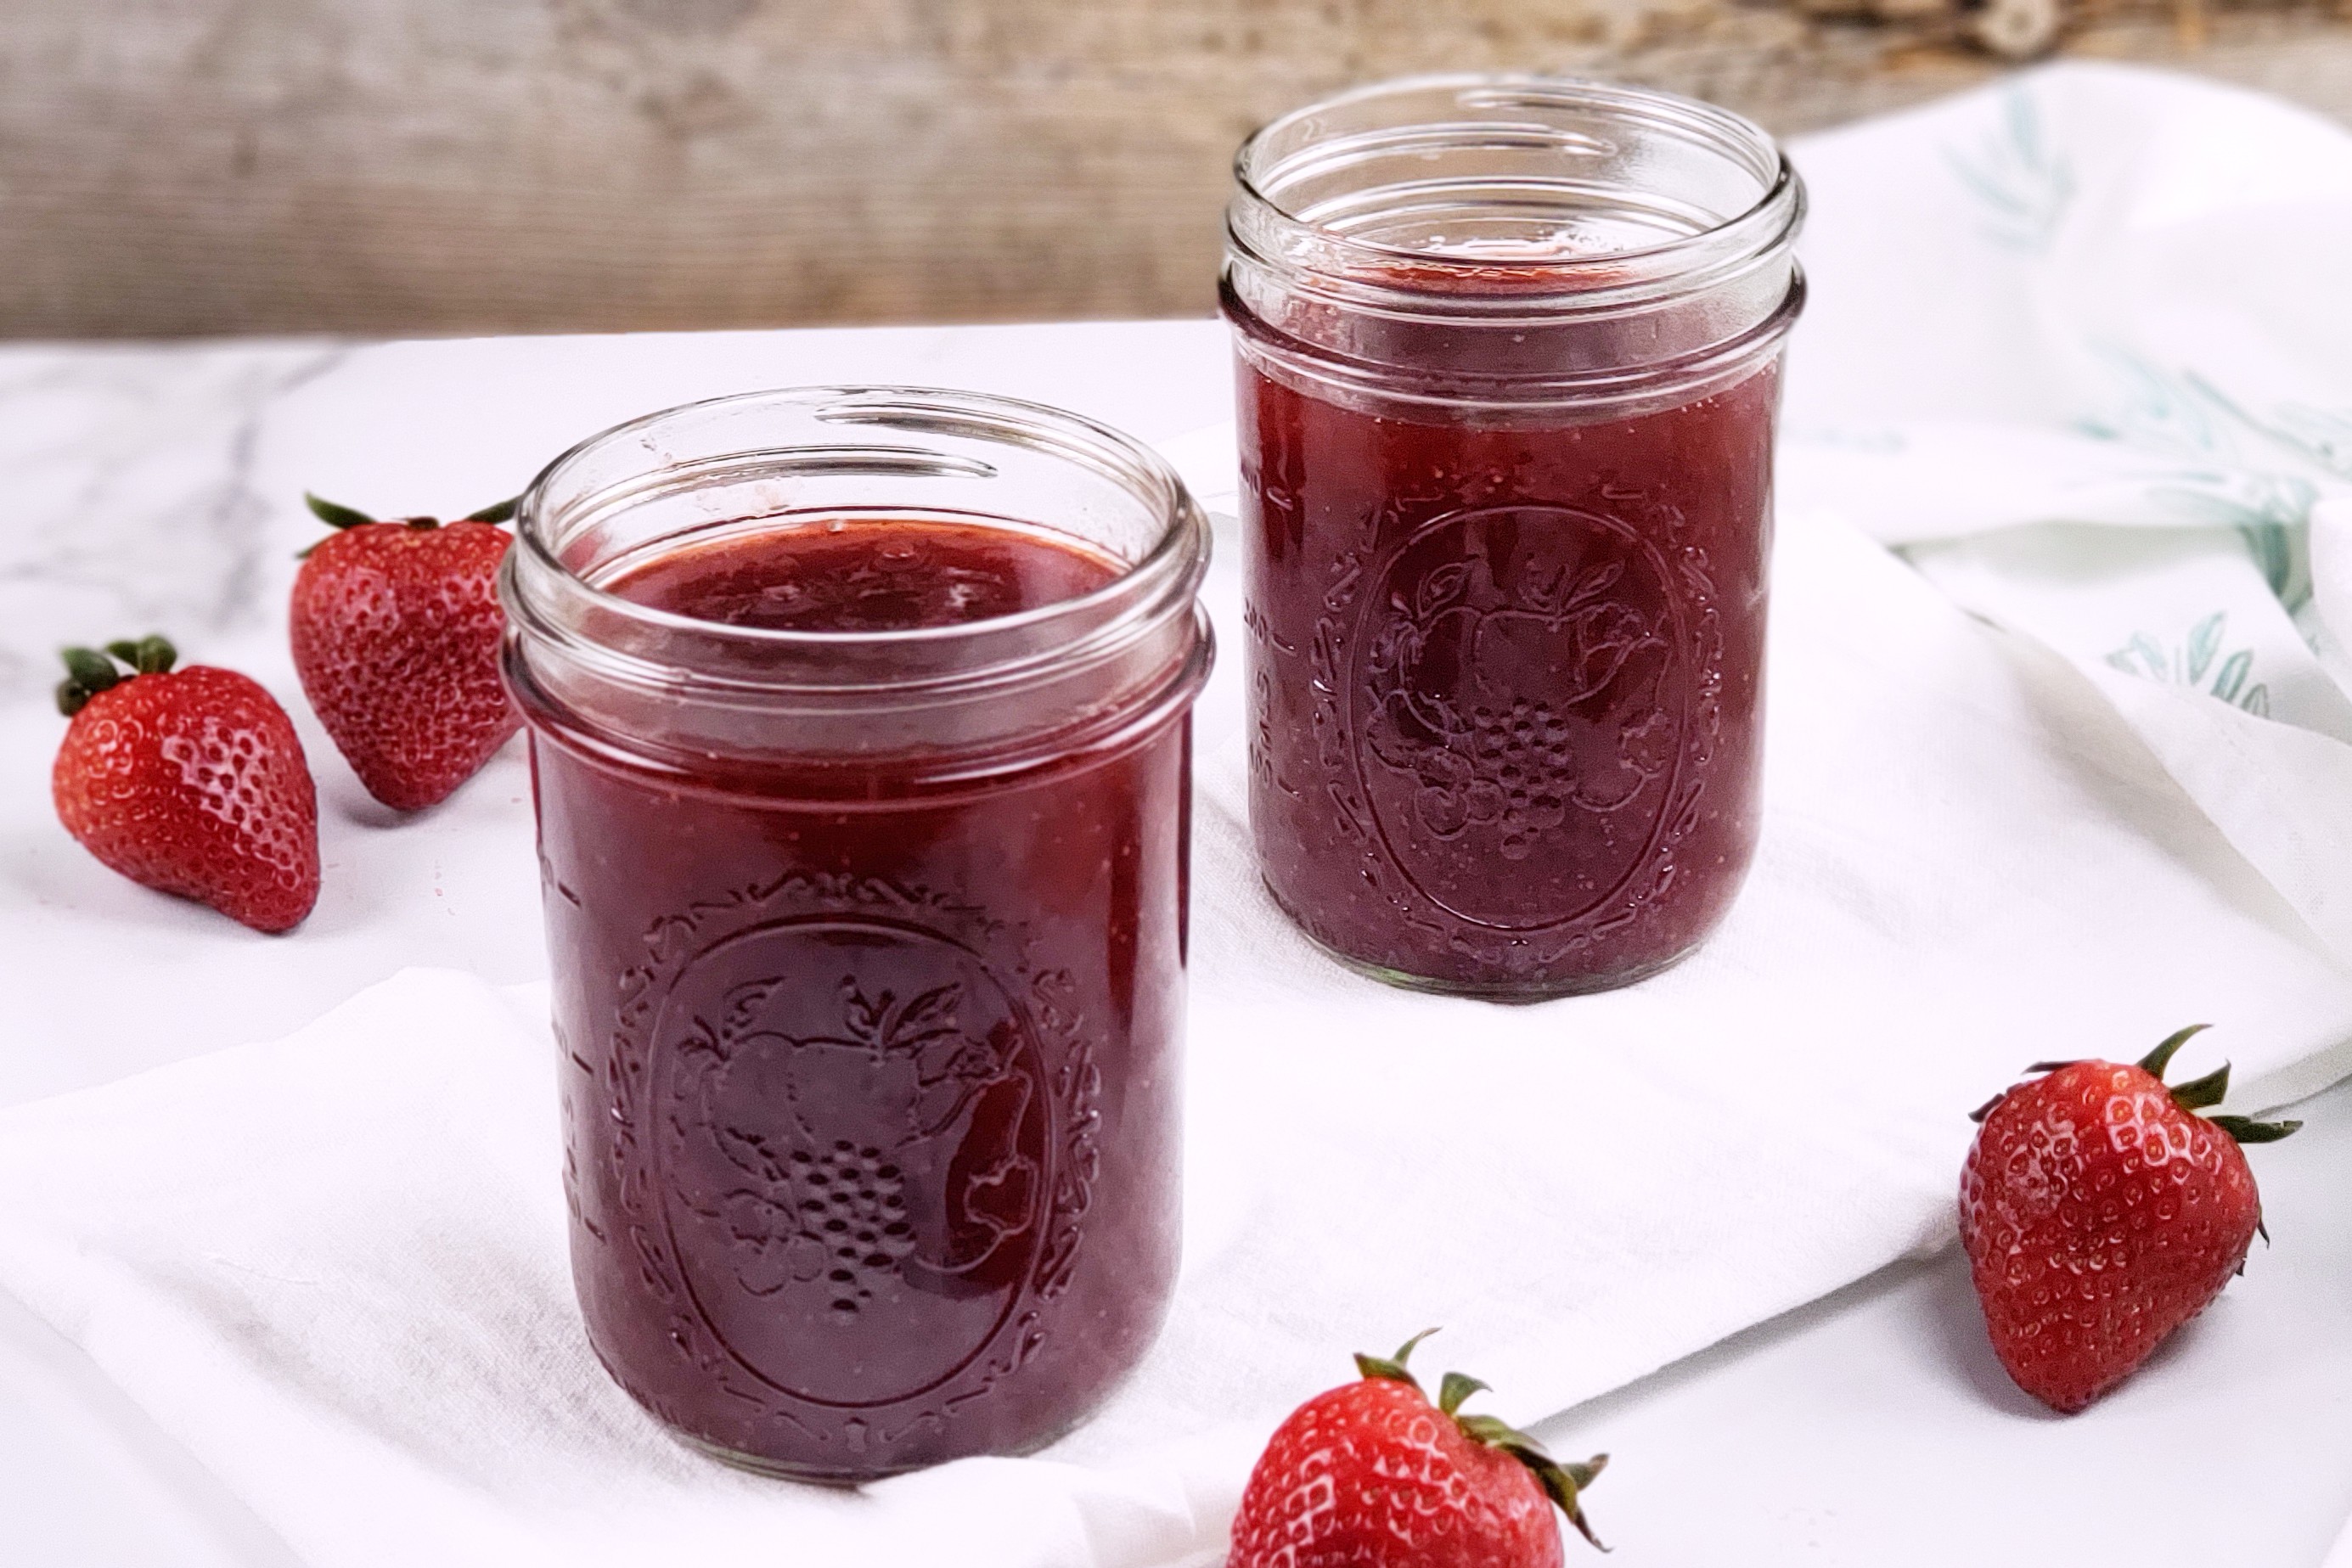 two jars of strawberry jam sitting on a tabletop with fresh strawberries around it.